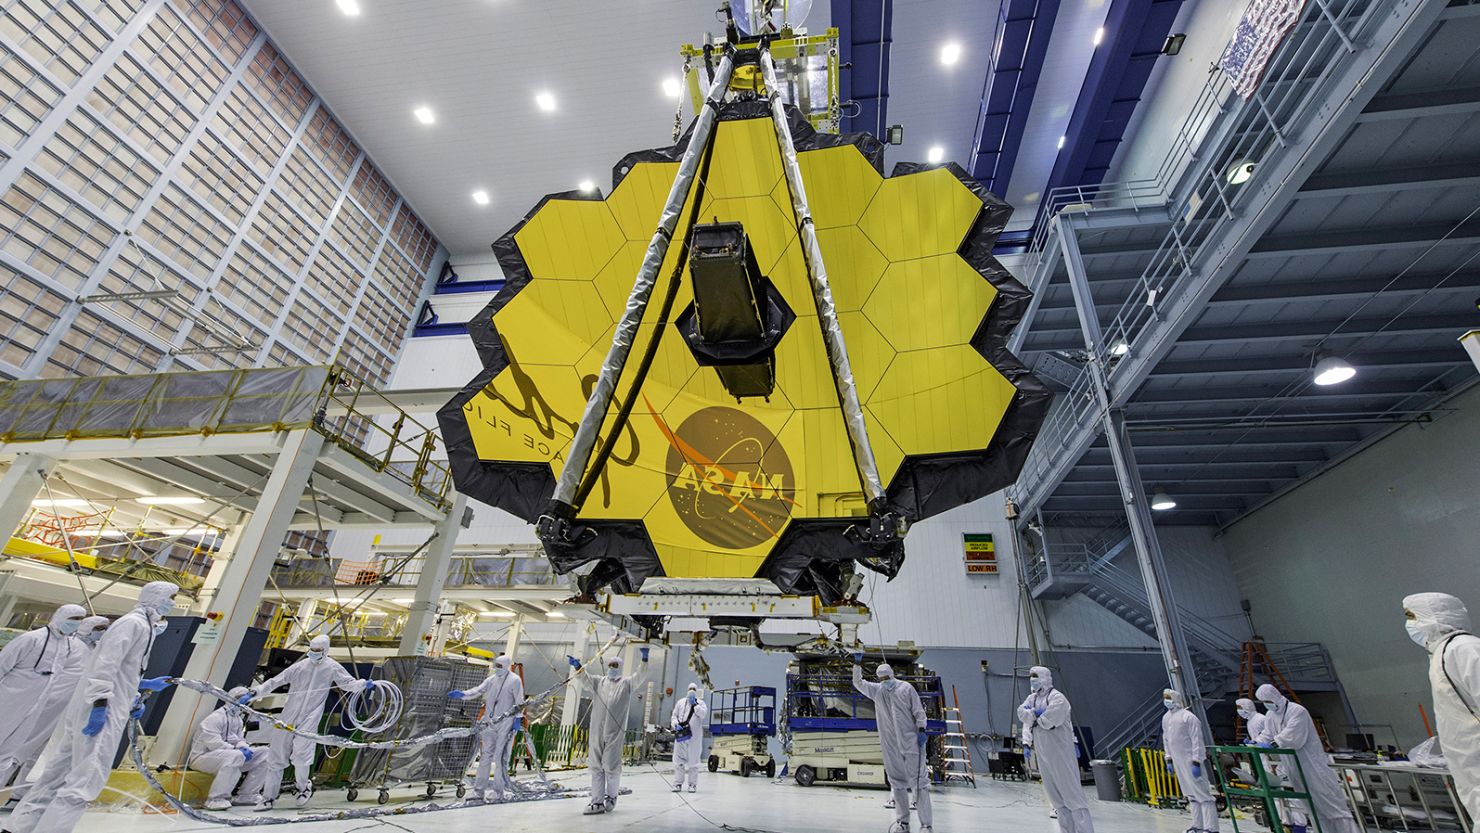 NASA's James Webb Space Telescope discovered 20 exoplanetary systems, and the International Astronomical Union wants people from around the globe to submit name recommendations. 